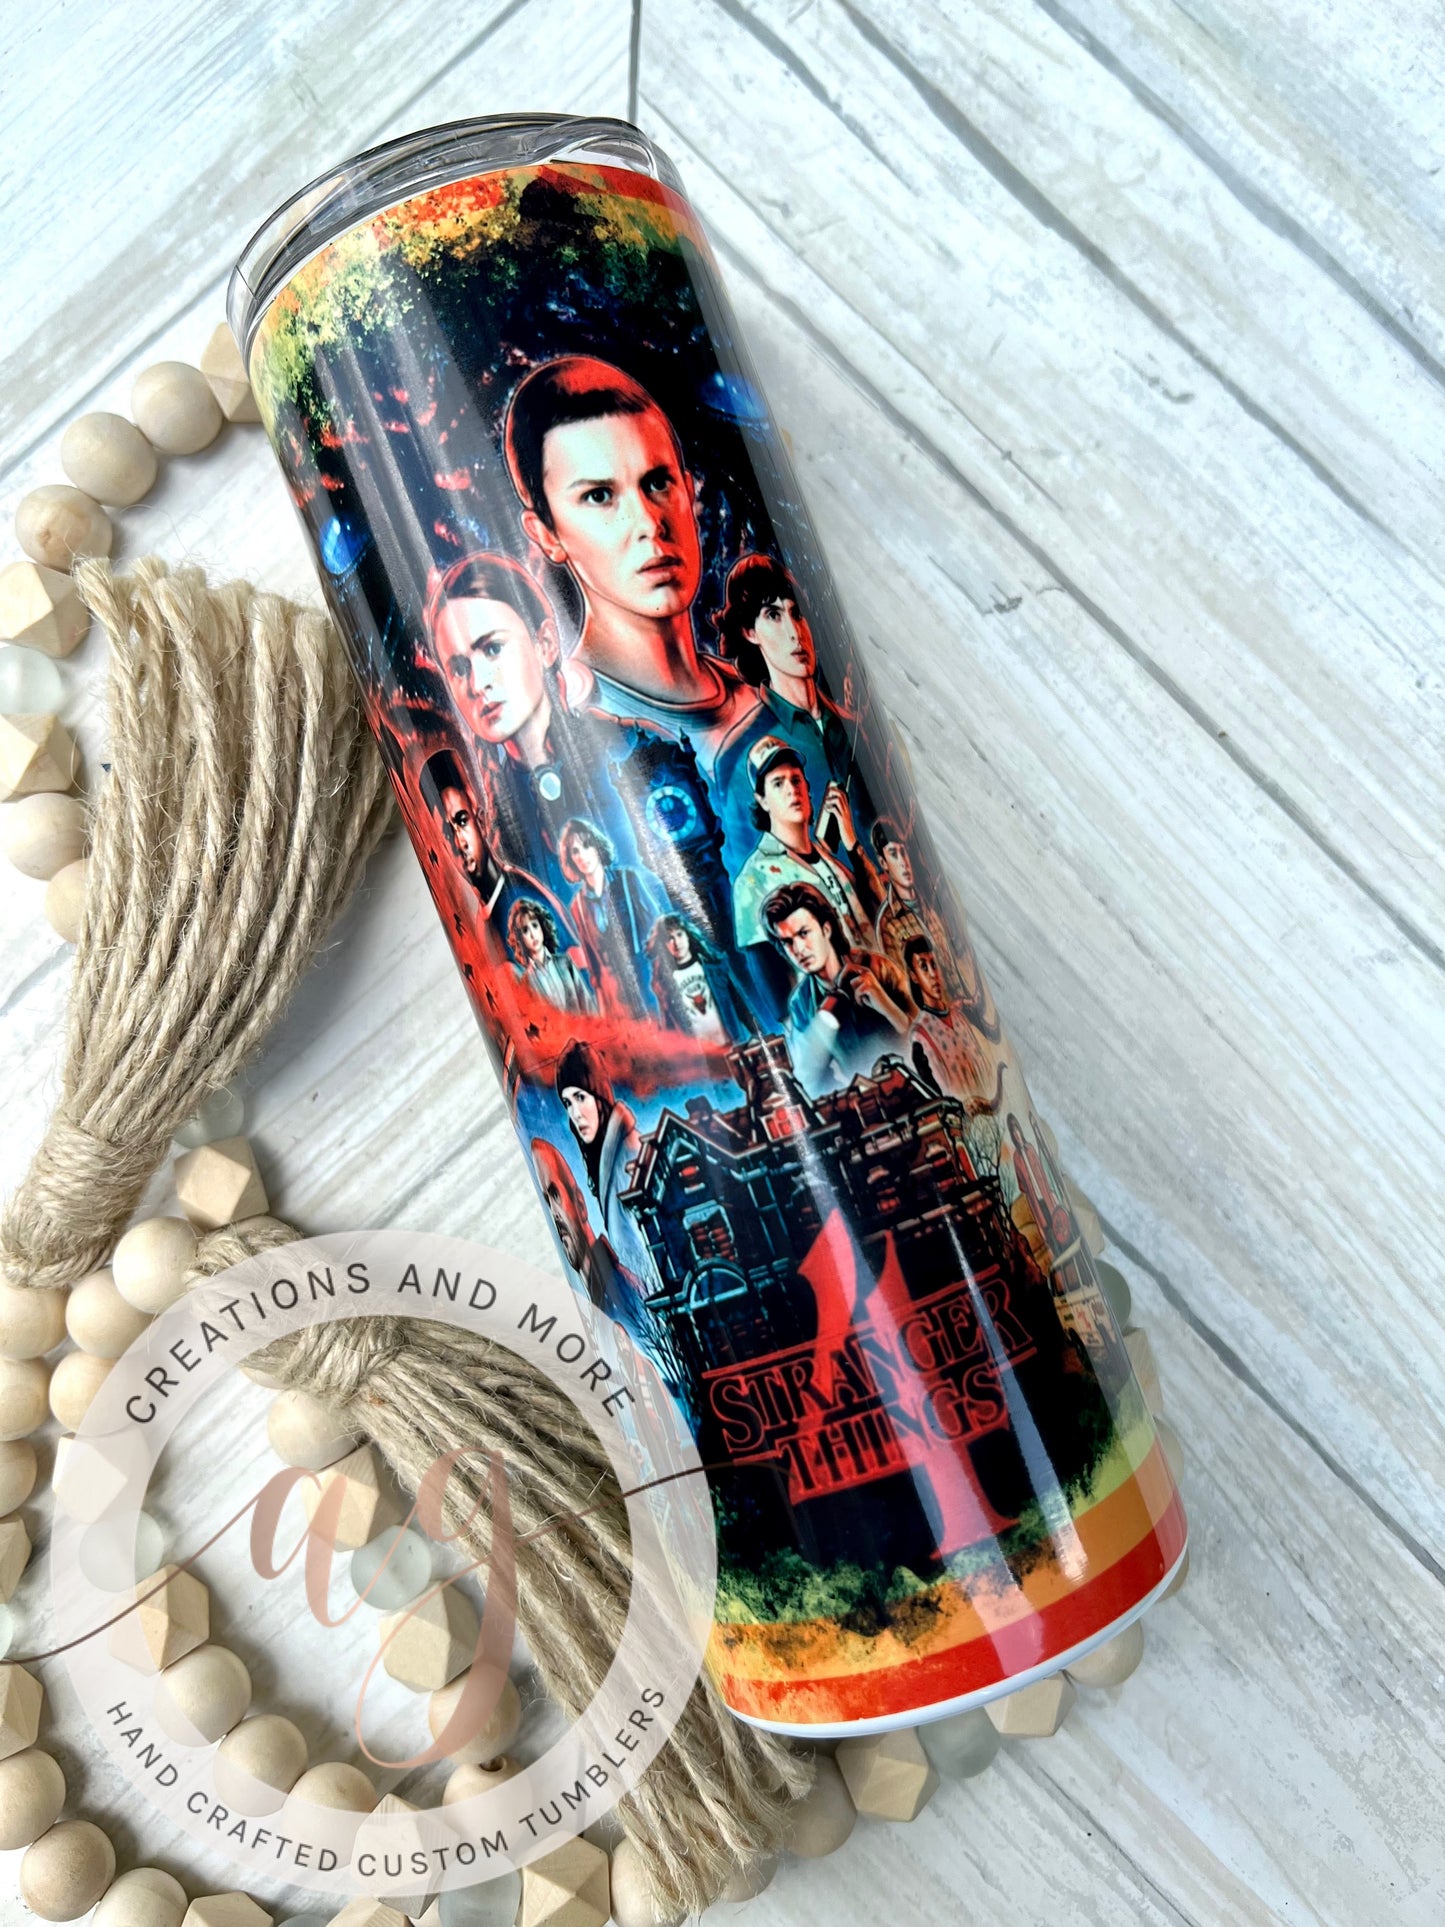 Stranger things Tumbler  3 listed – AG Creations and more